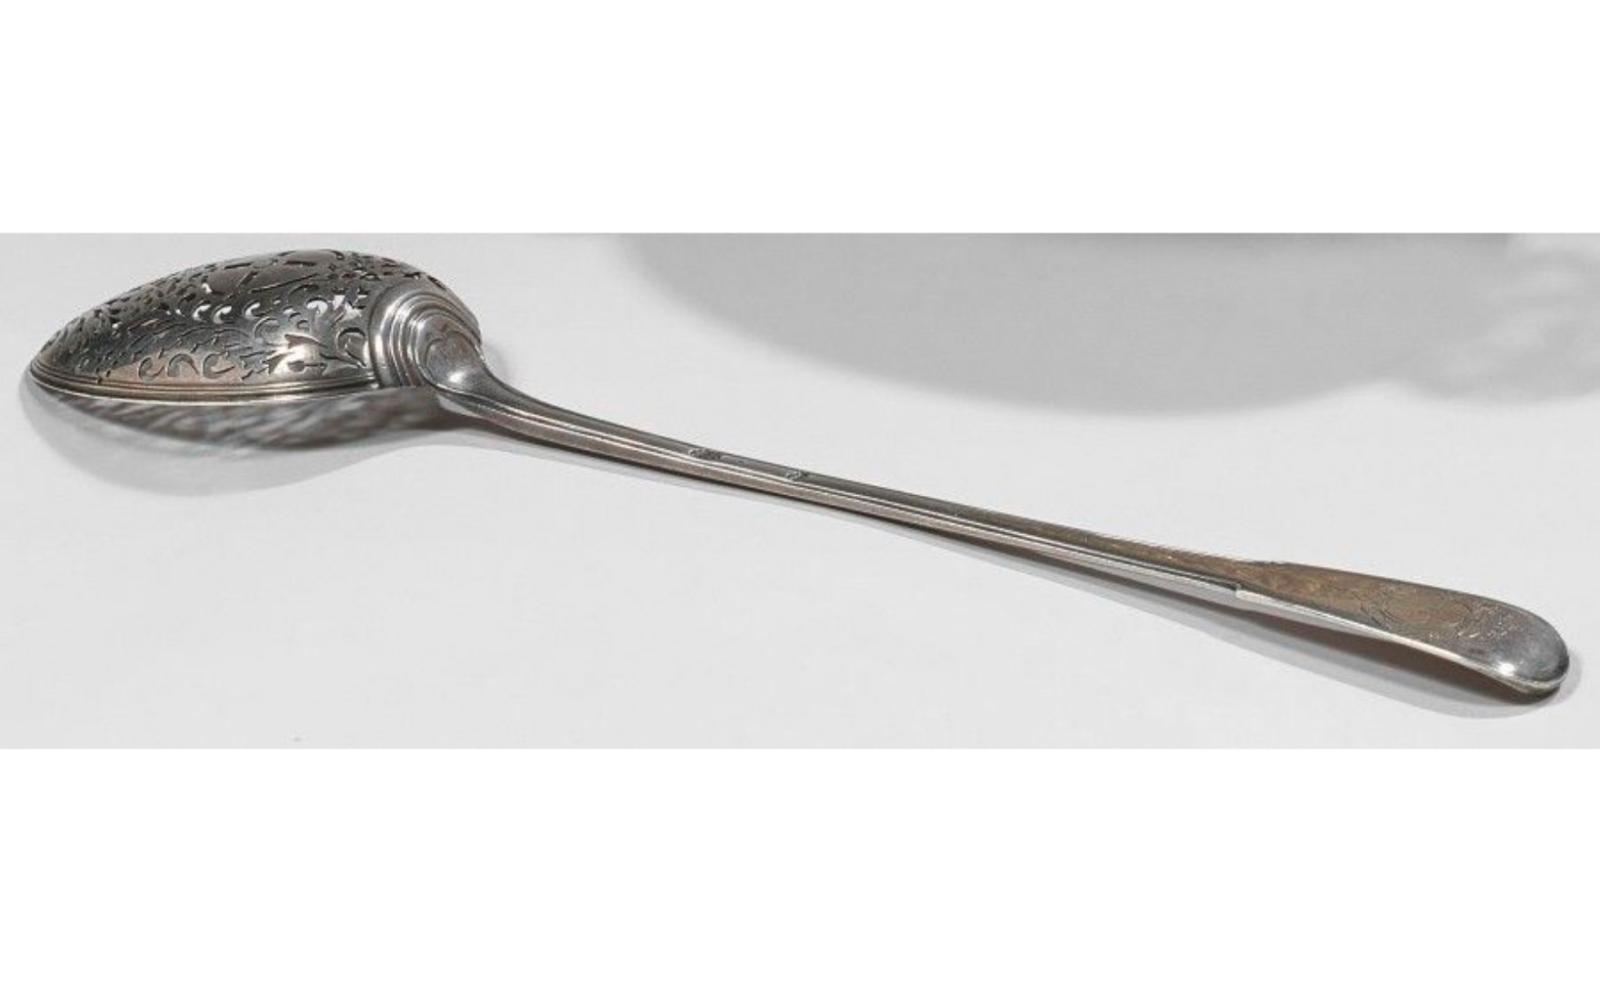 €4,900Narbonne, mid-18th century. Silver olive spoon, model with threads, coat of arms engraved on the spatula and pierced section, master